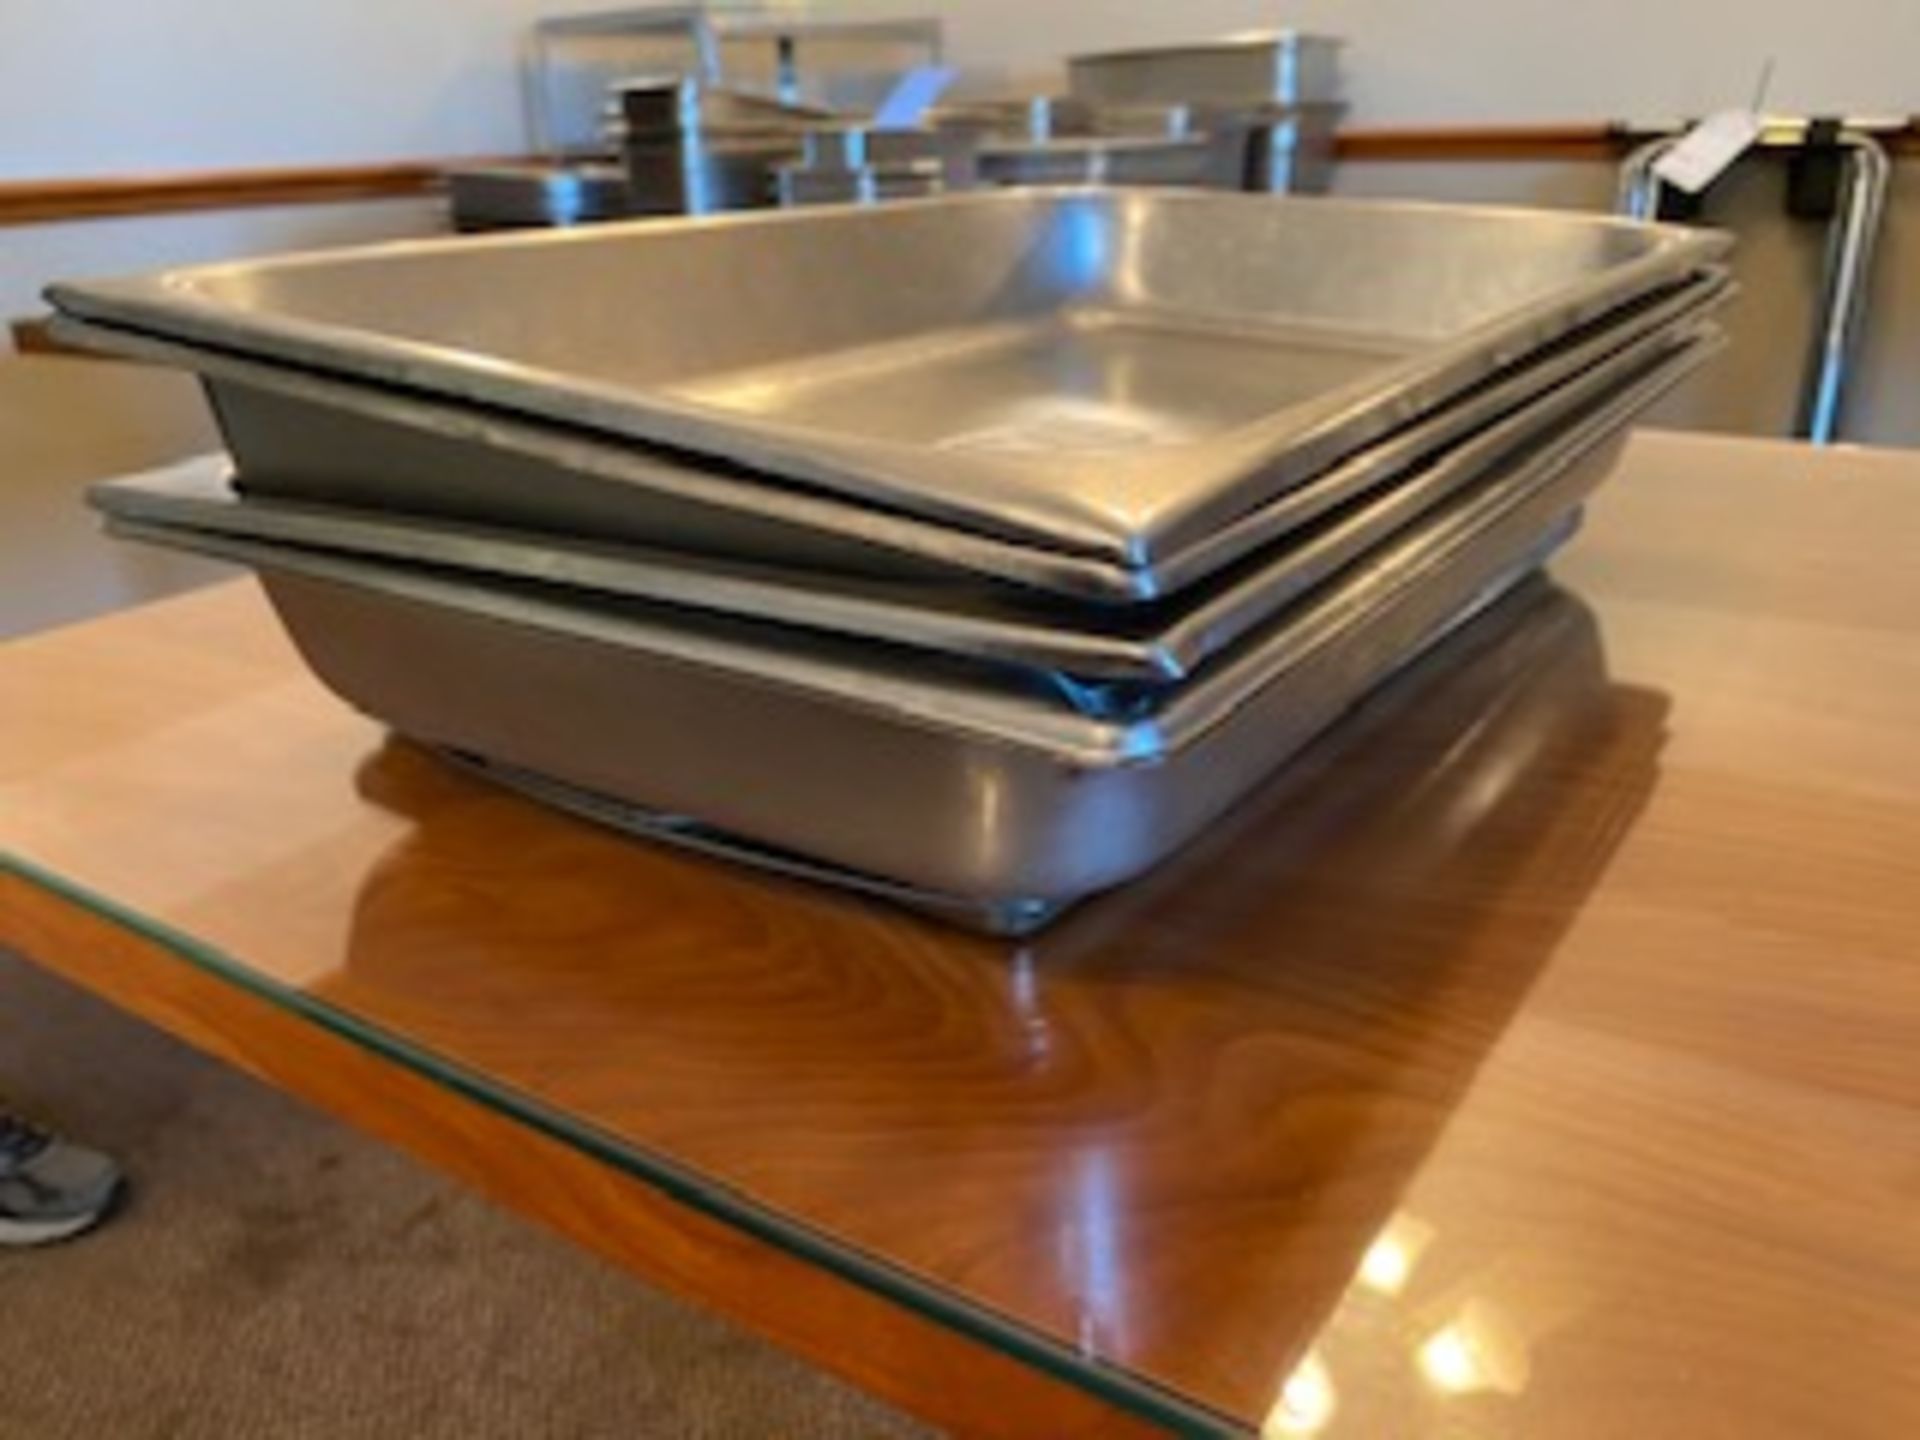 (4) 20x12x3" deep stainless inserts